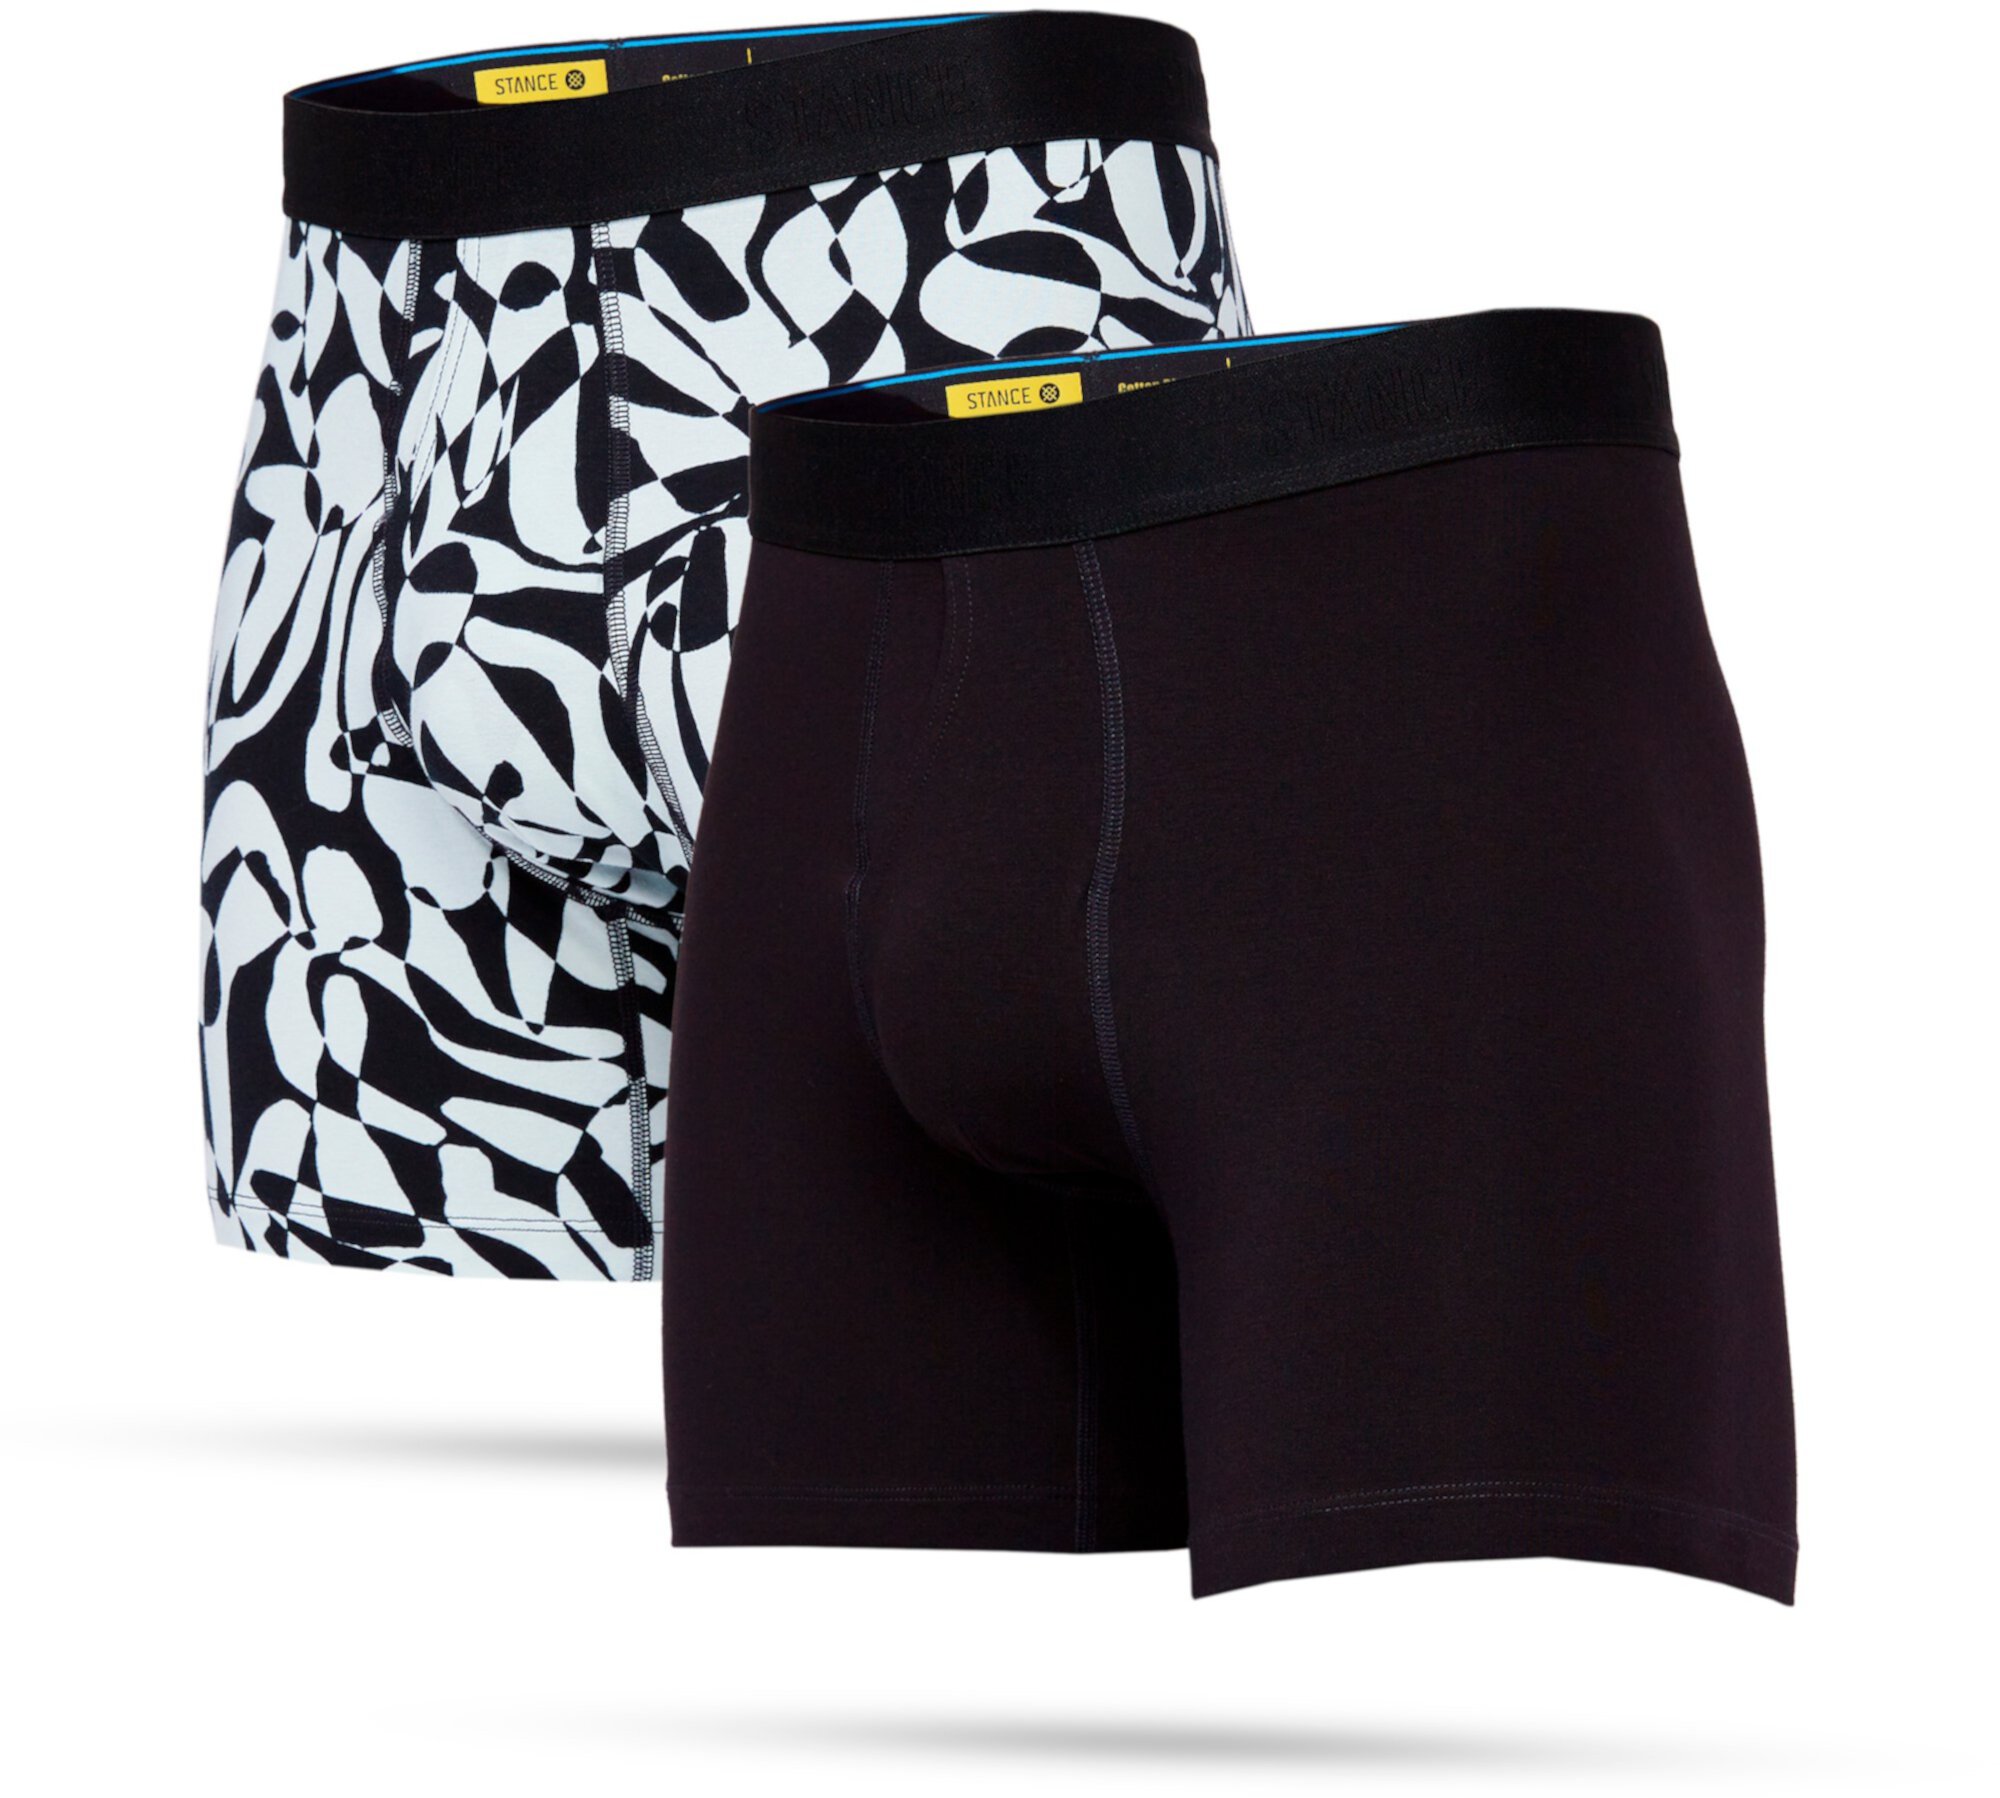 Road Trip Boxer Brief 2 Pack Stance